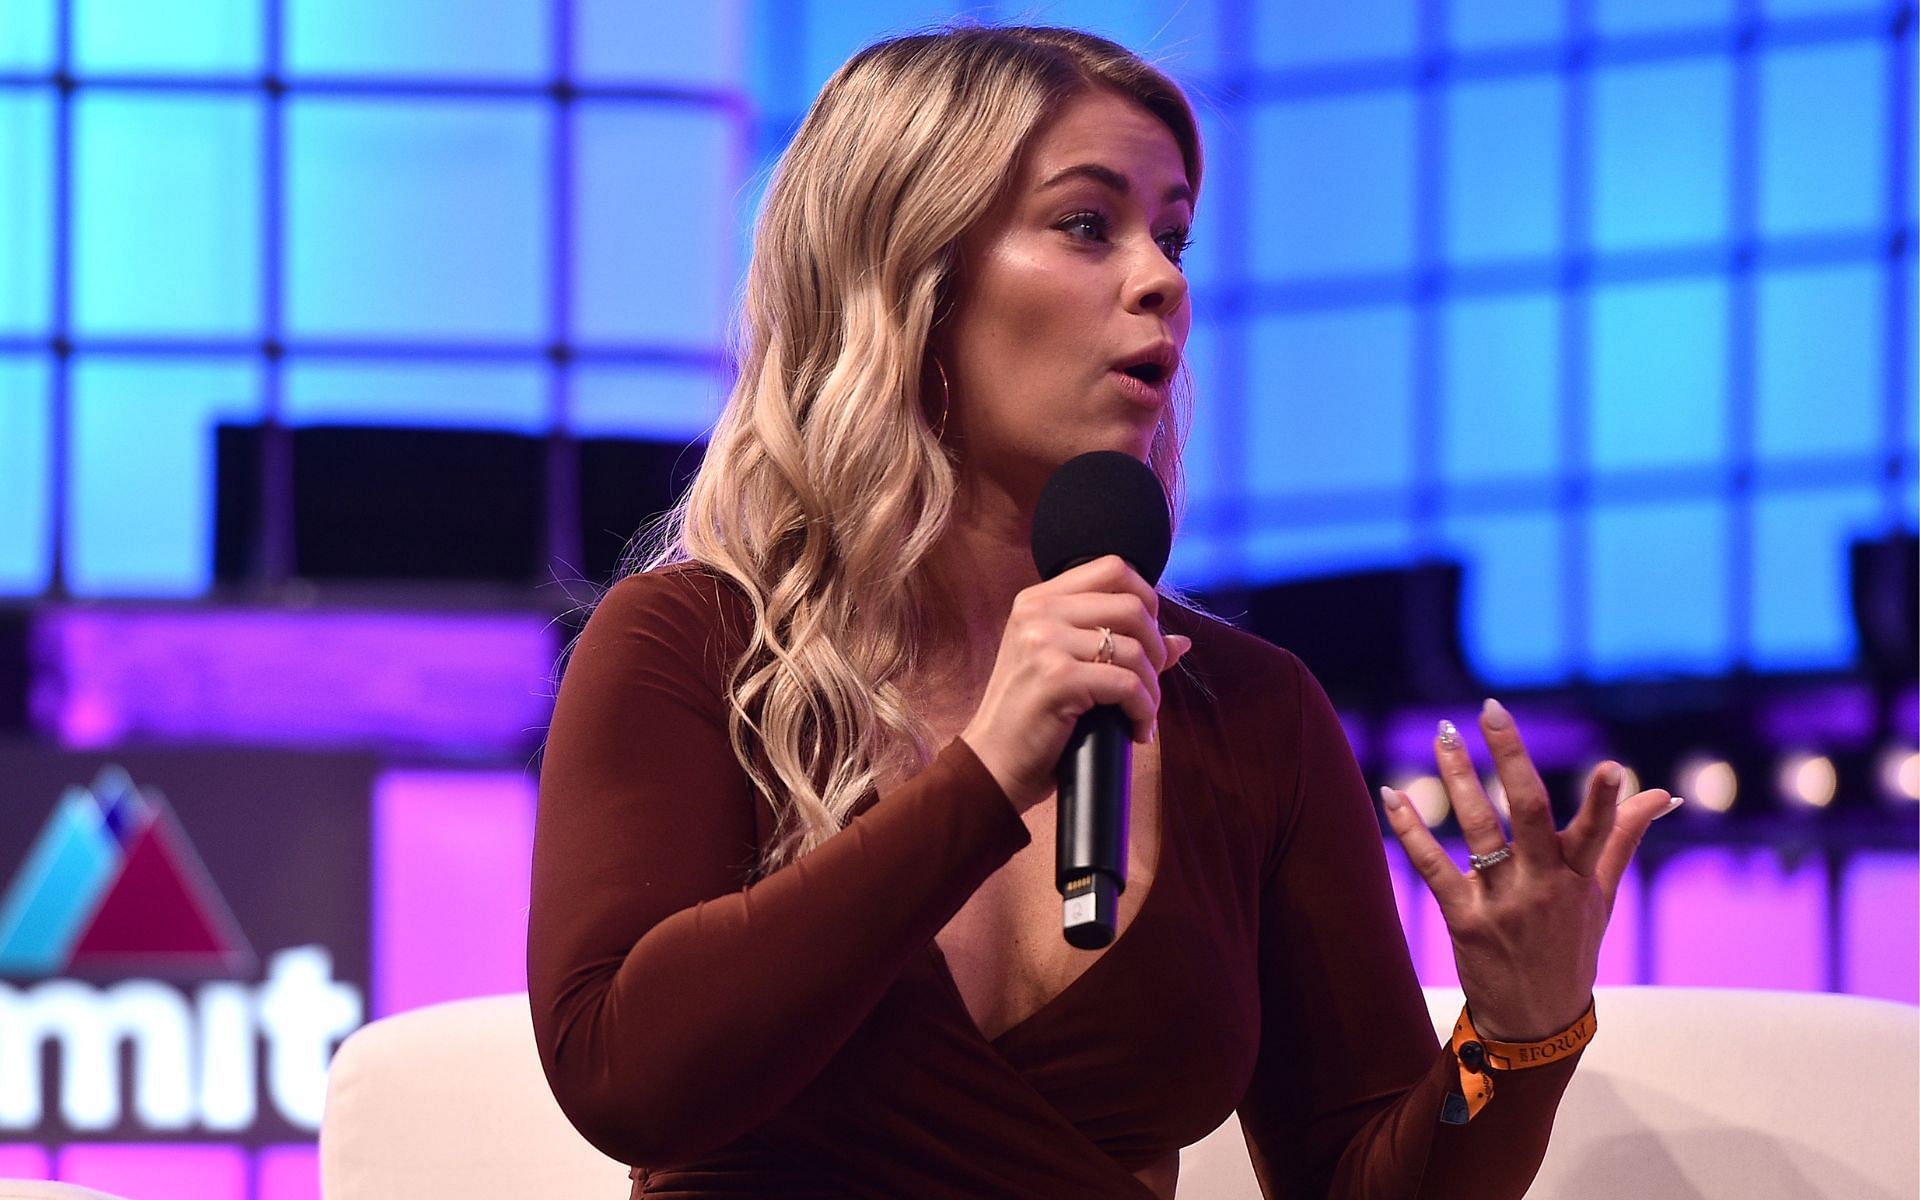 Paige VanZant was regarded as one of the top MMA strawweight prospects when she debuted in the UFC [Image courtesy: Getty Images]